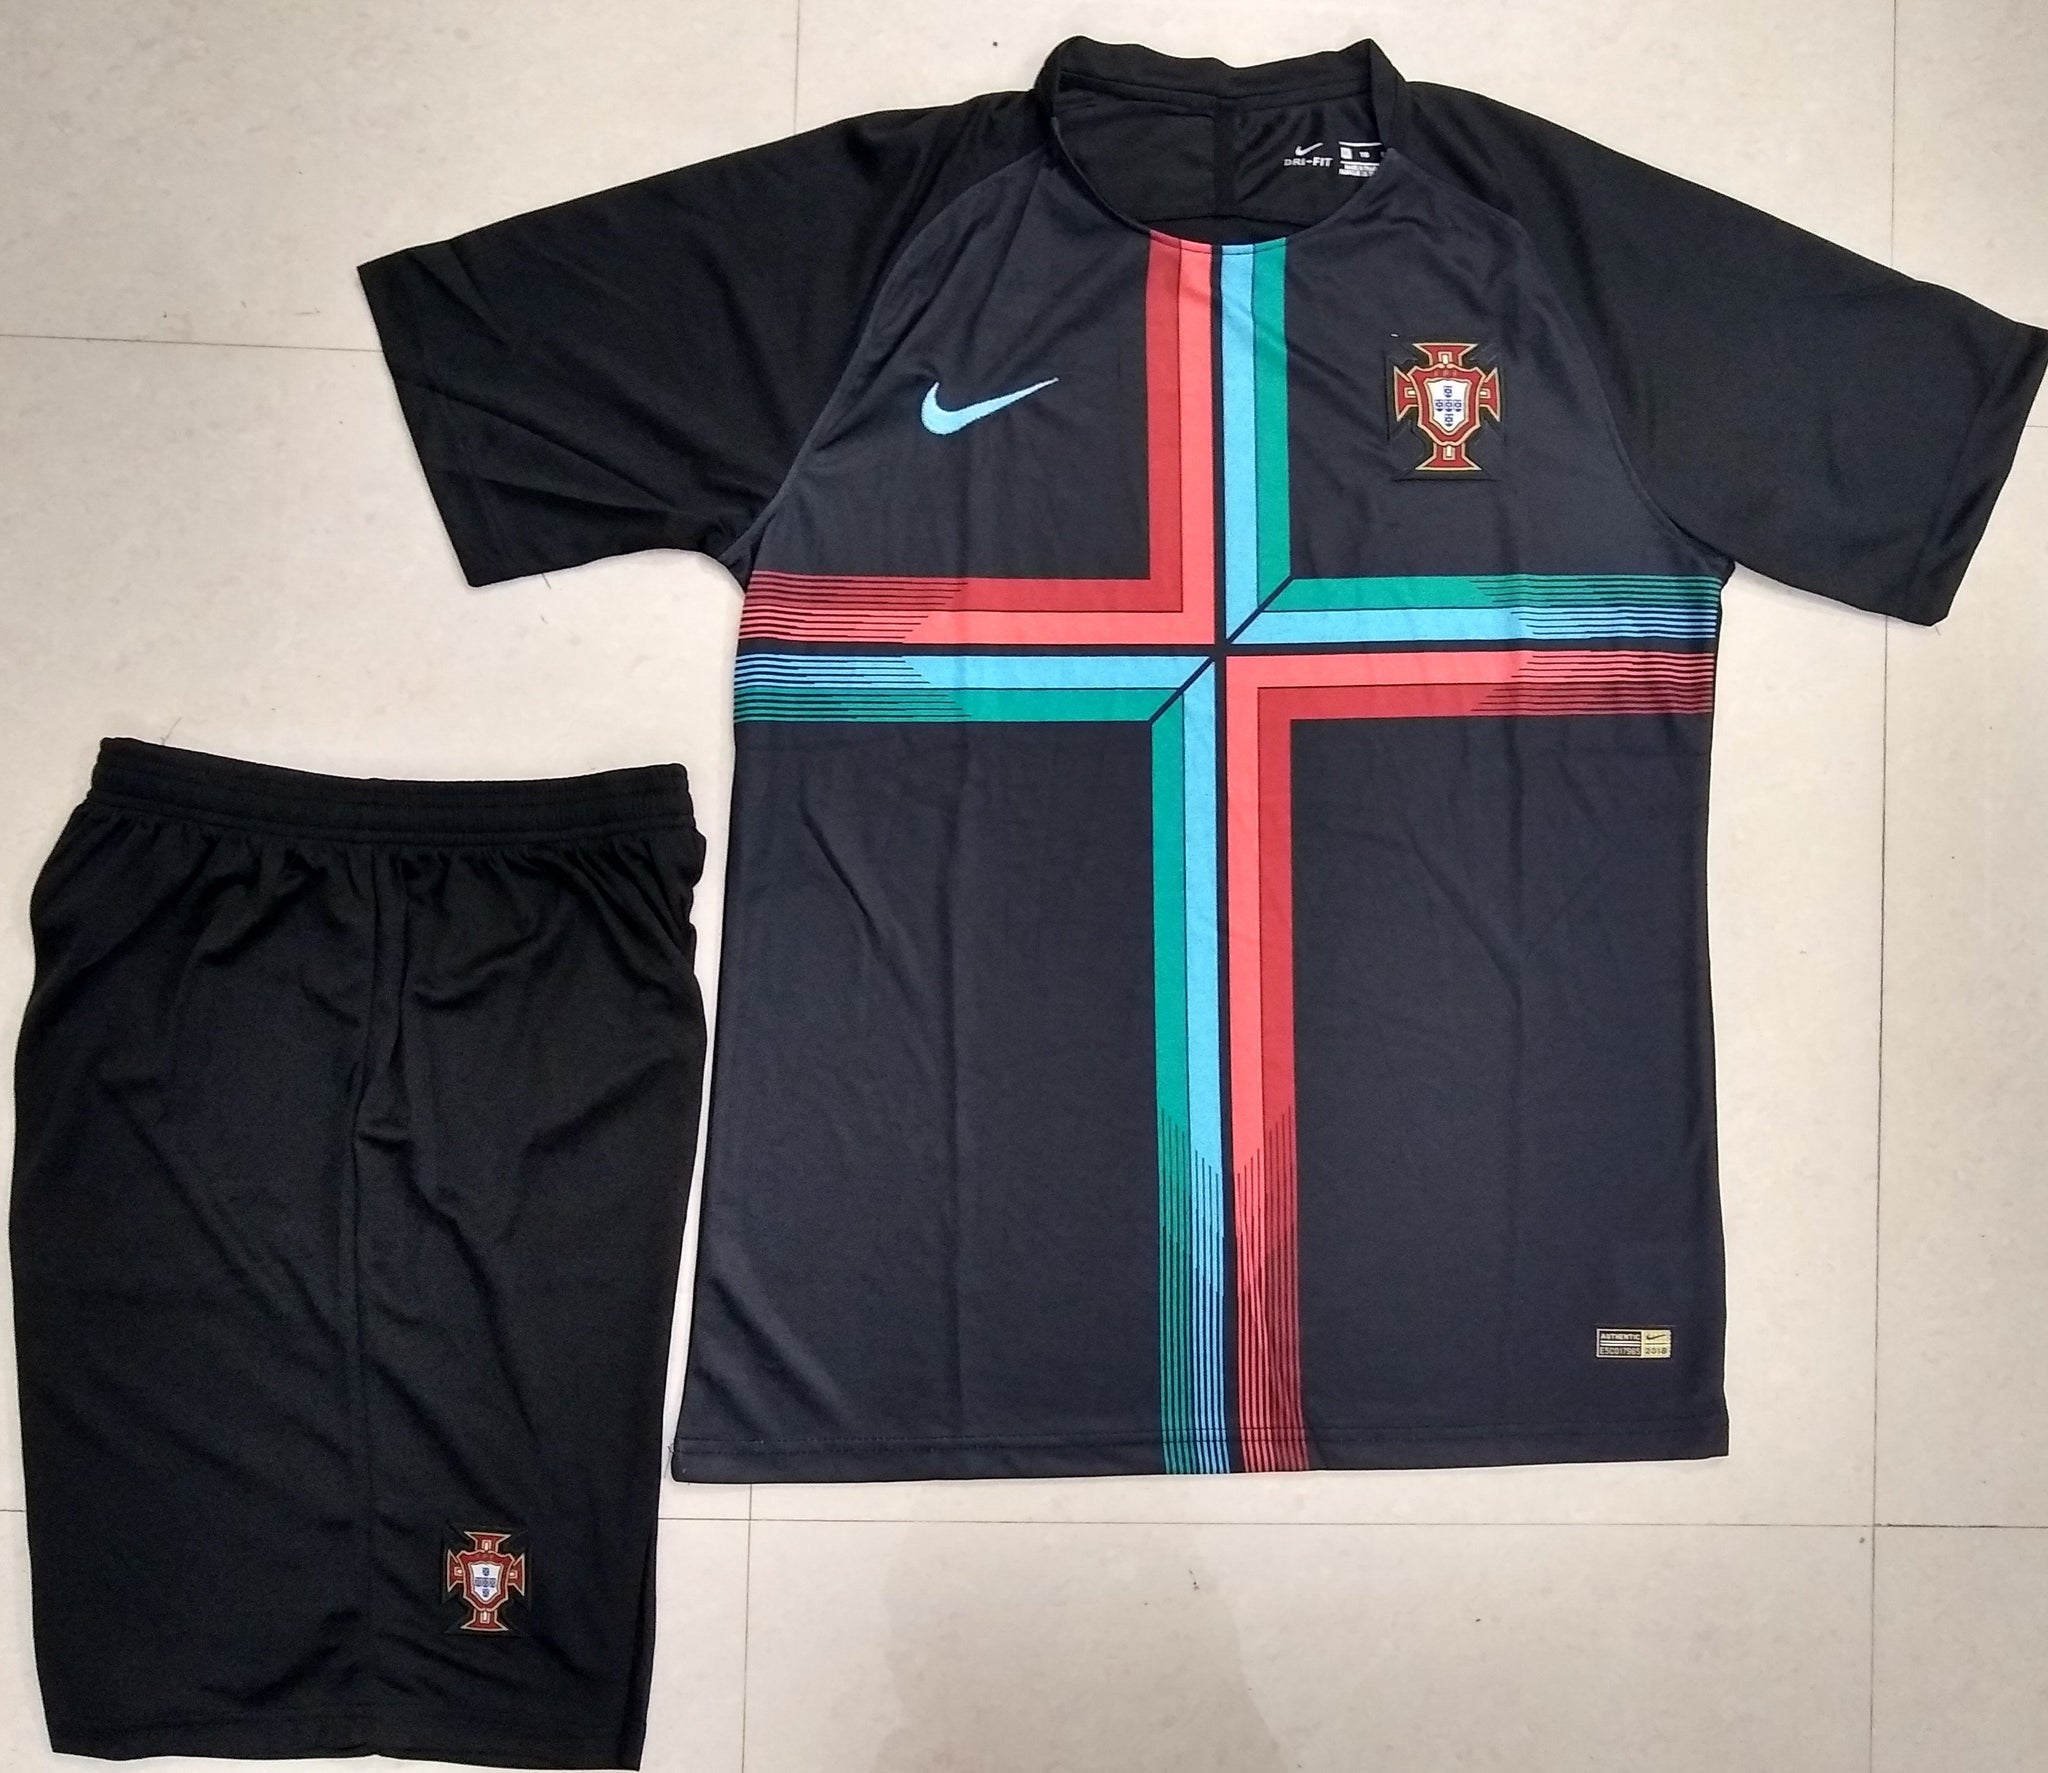 buy portugal jersey online india